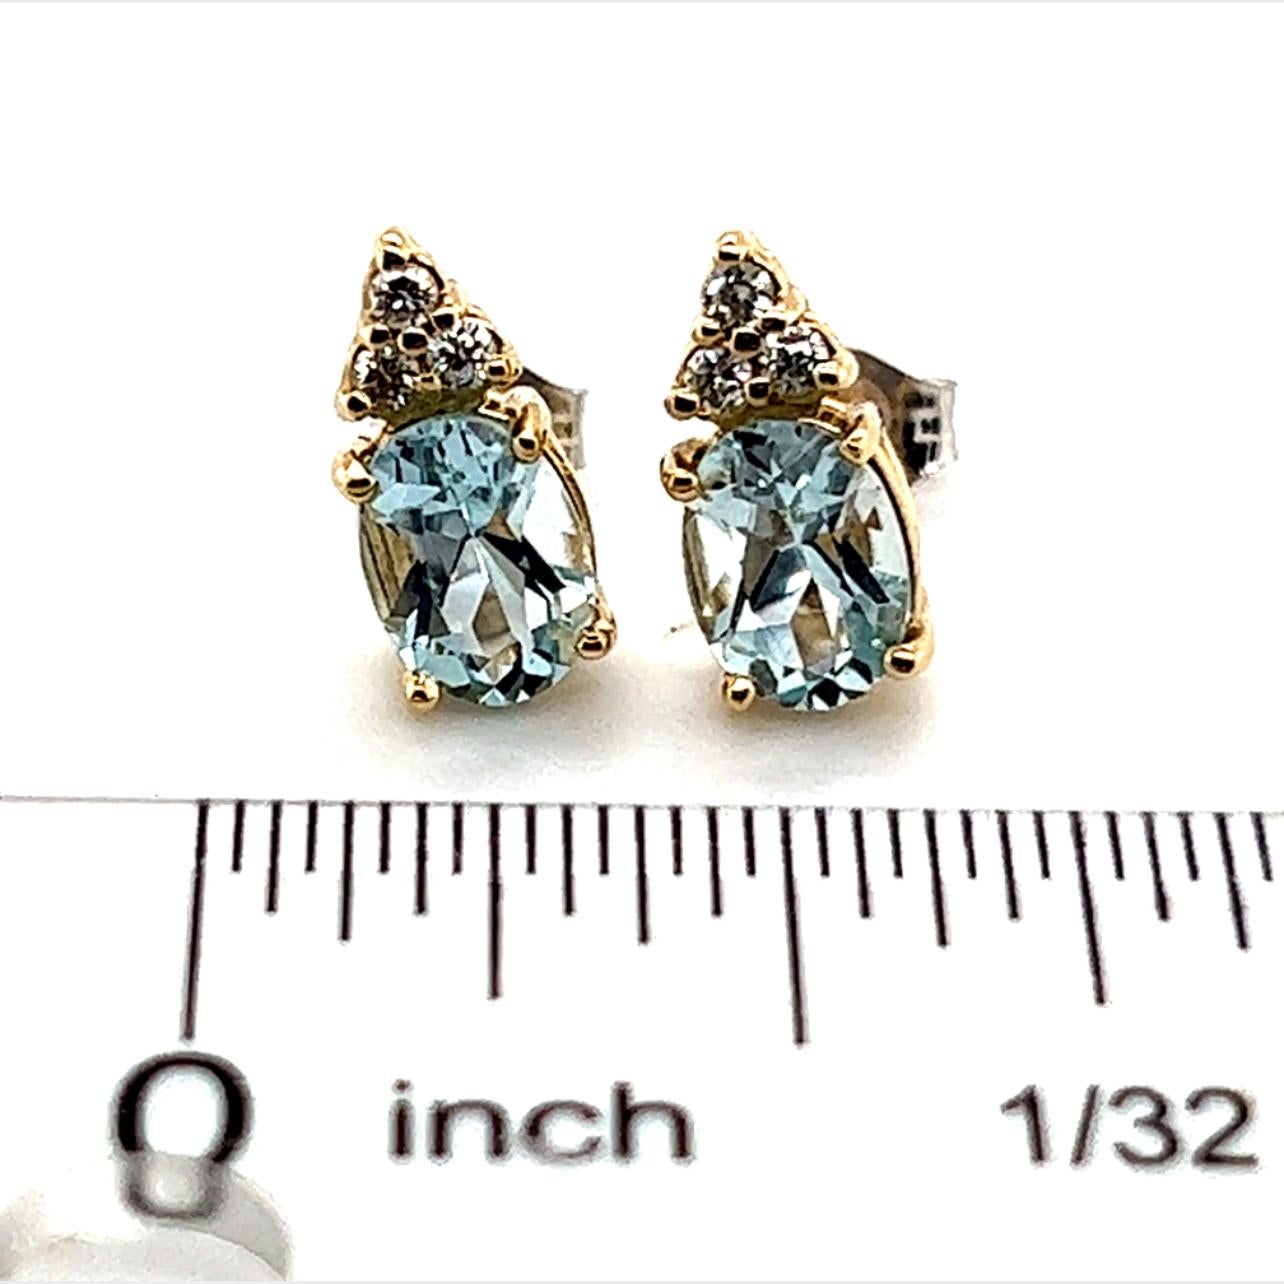 Natural Aquamarine Diamond Earrings 14k Y Gold 1.85 TCW Certified For Sale 7